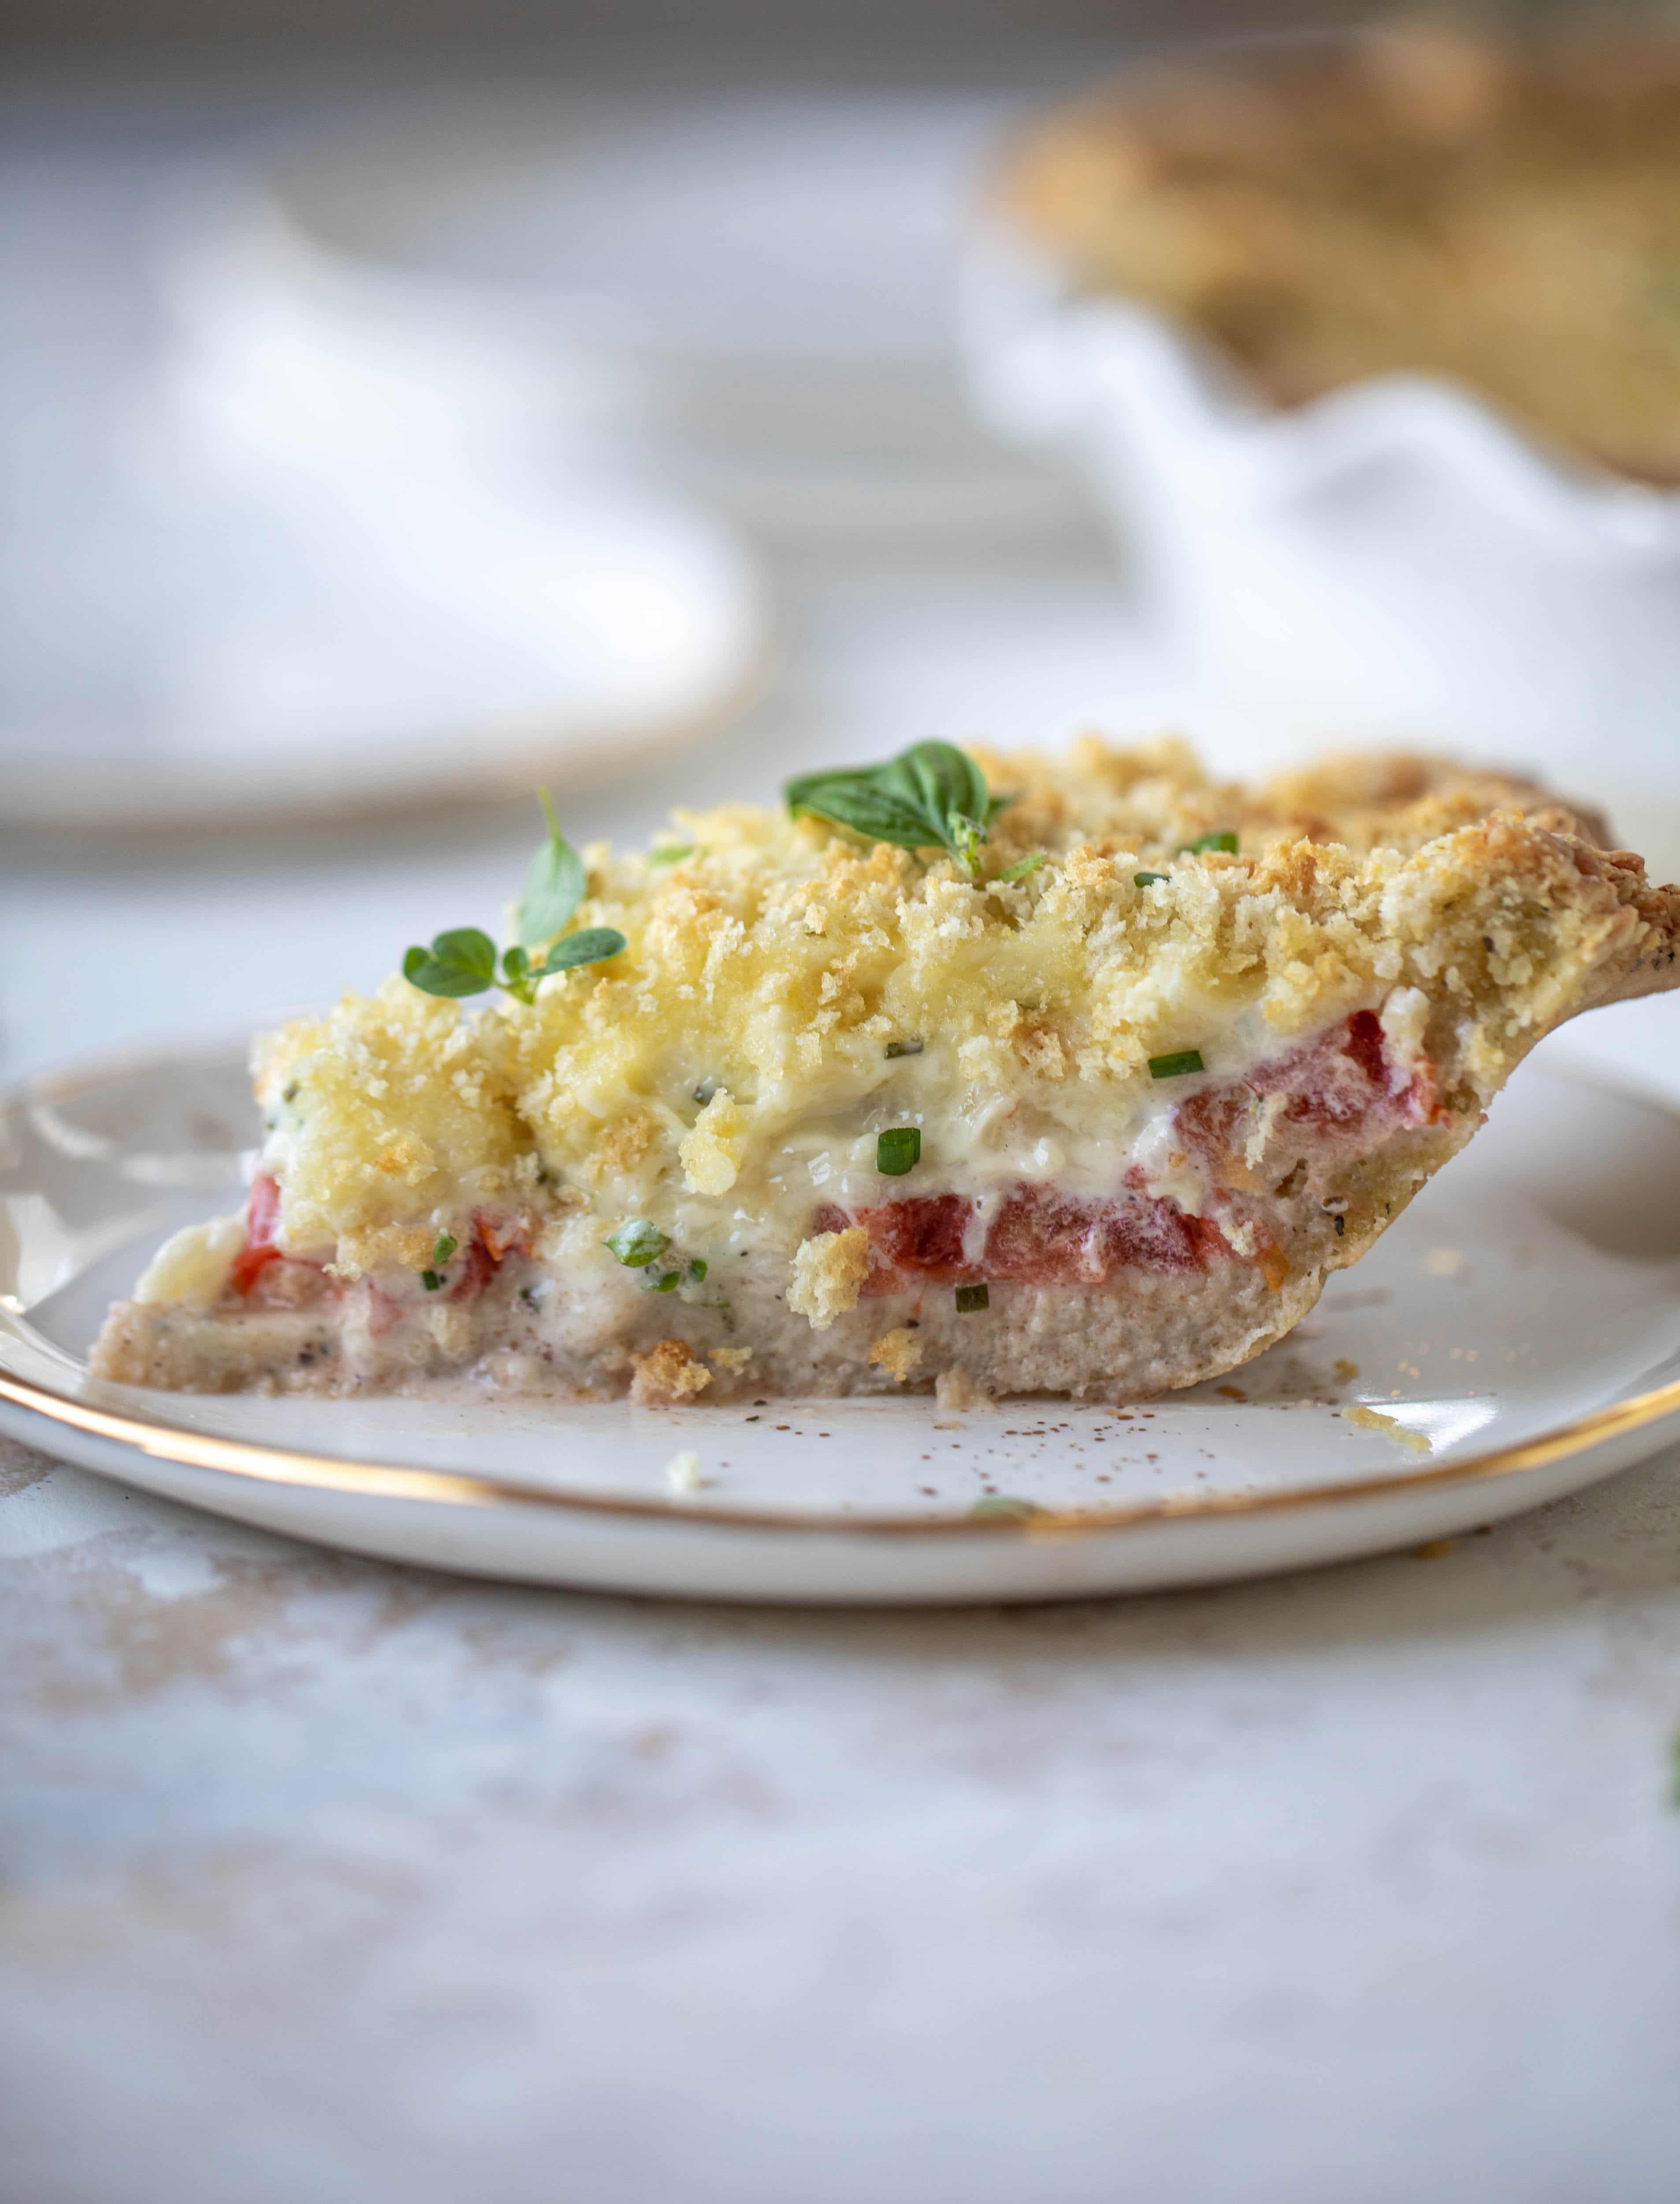 This summer tomato pie is the best dinner ever! Cheddar herb crust, ripe, juicy tomatoes and a cheesy, crunchy layer on top. It's irresistible. 